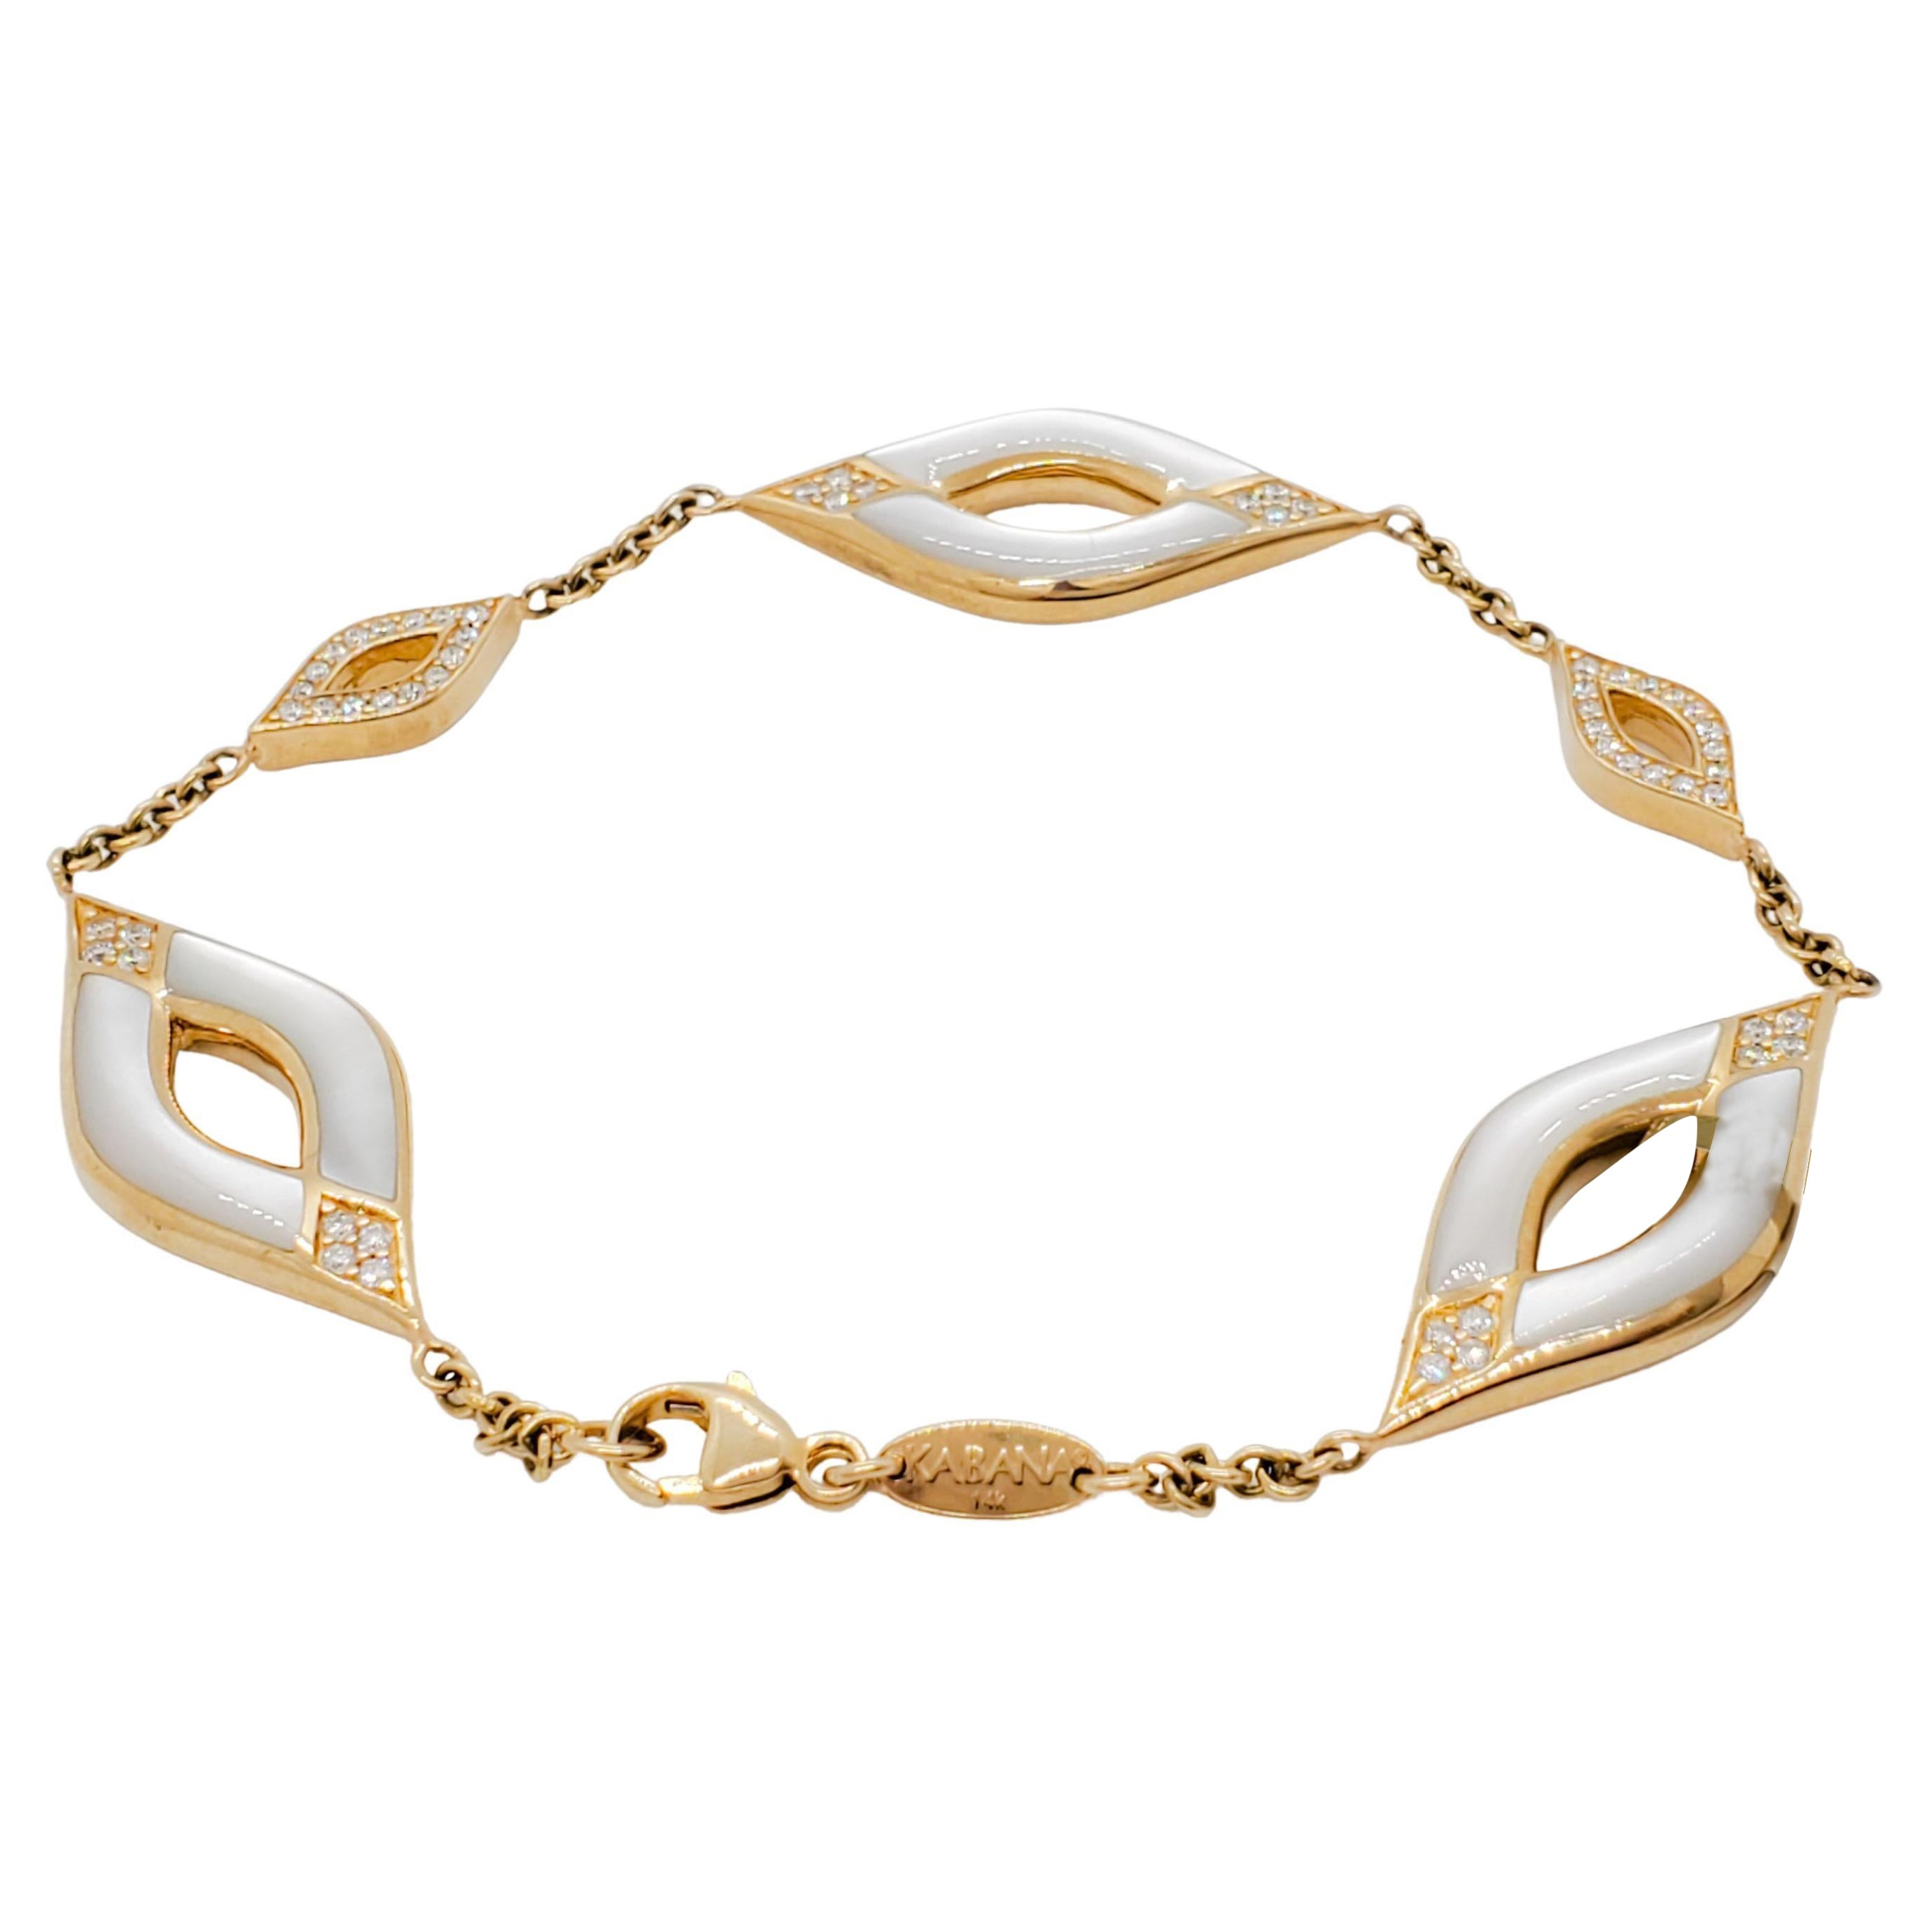 Estate Kabana White Mother of Pearl and Diamond Bracelet in 14k Yellow Gold